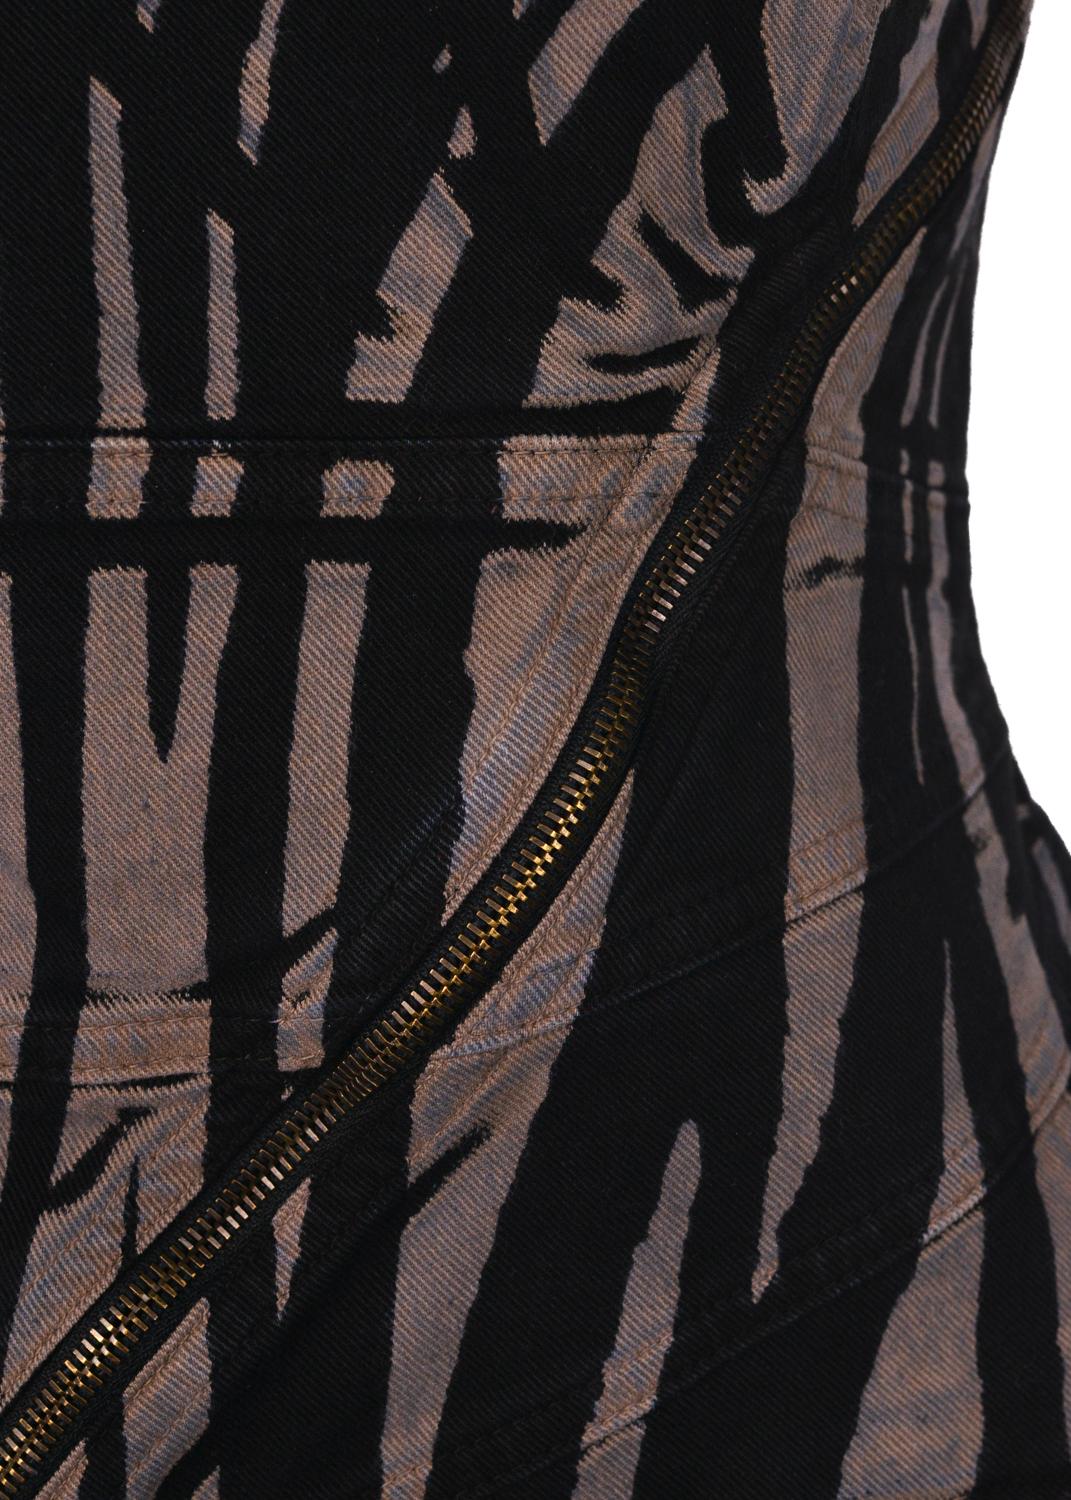 Roberto Cavalli Black Zebra Print Denim Dress. This dress features zippers throughout the silhouette as well as a tonal stitching. 



100 Percent Denim 
Zebra Print 
Knee Length 
Zip Up
Zippers 
Made In Italy 